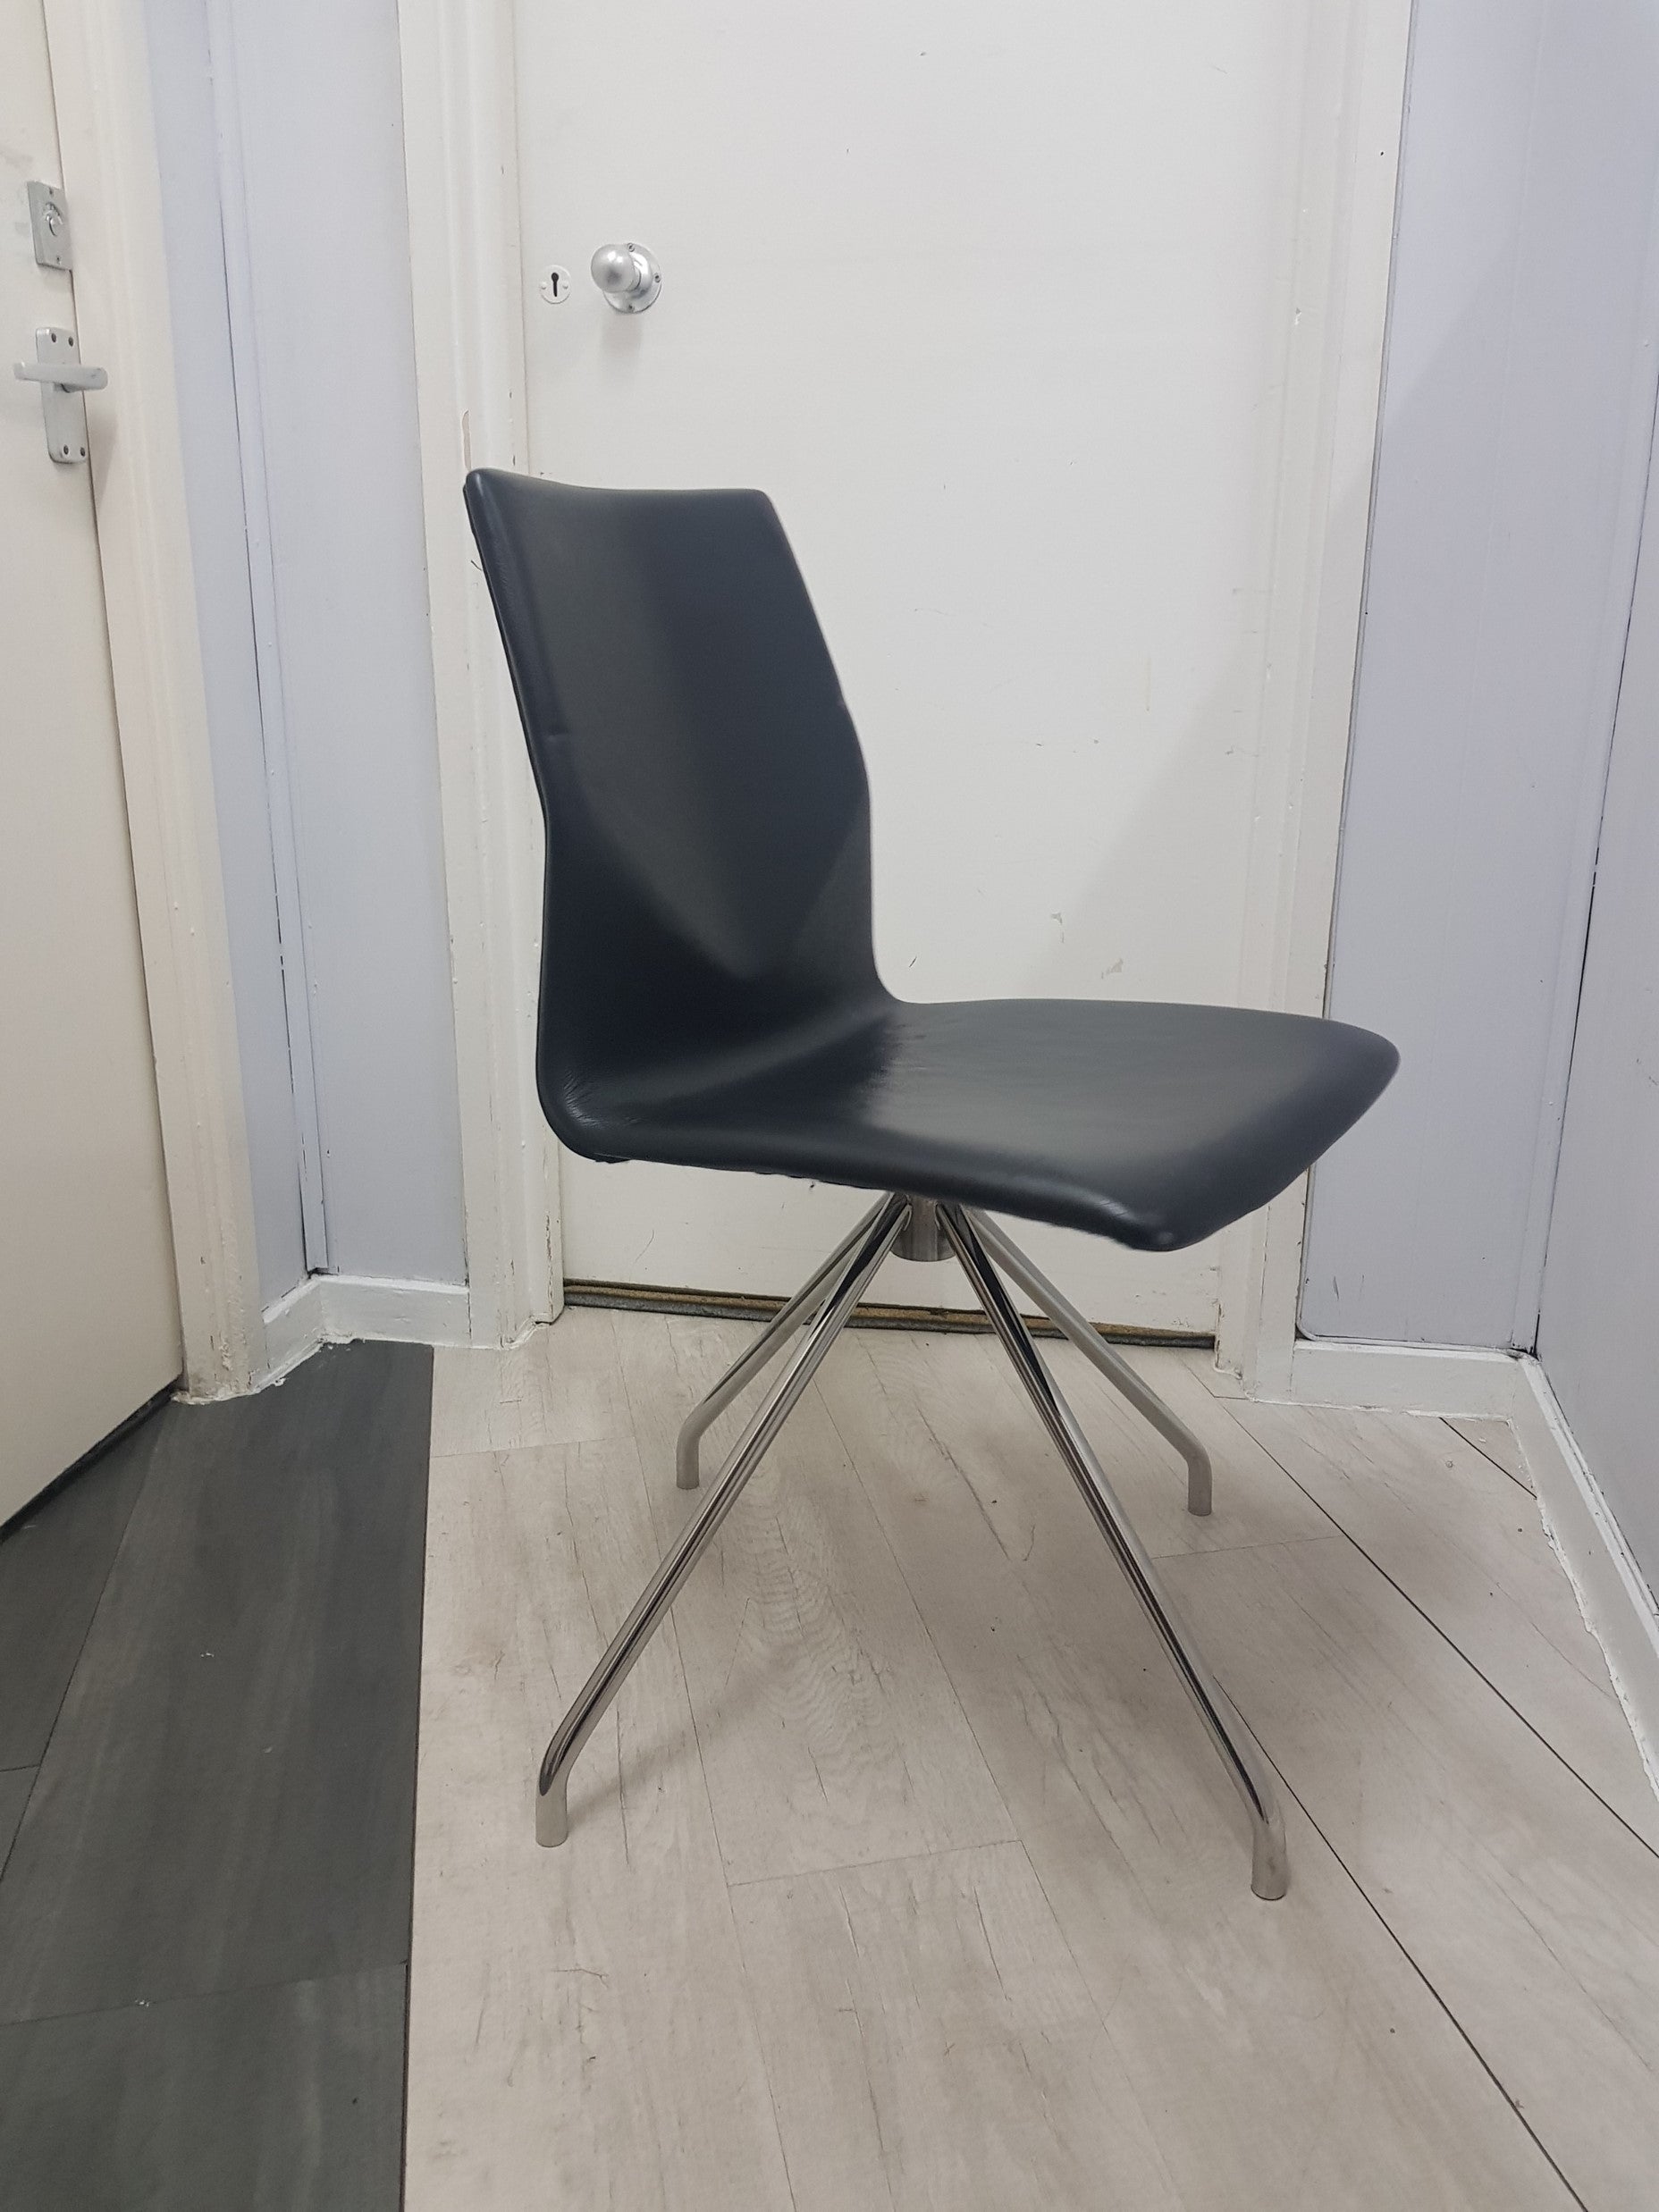 Black Office Leather Chair